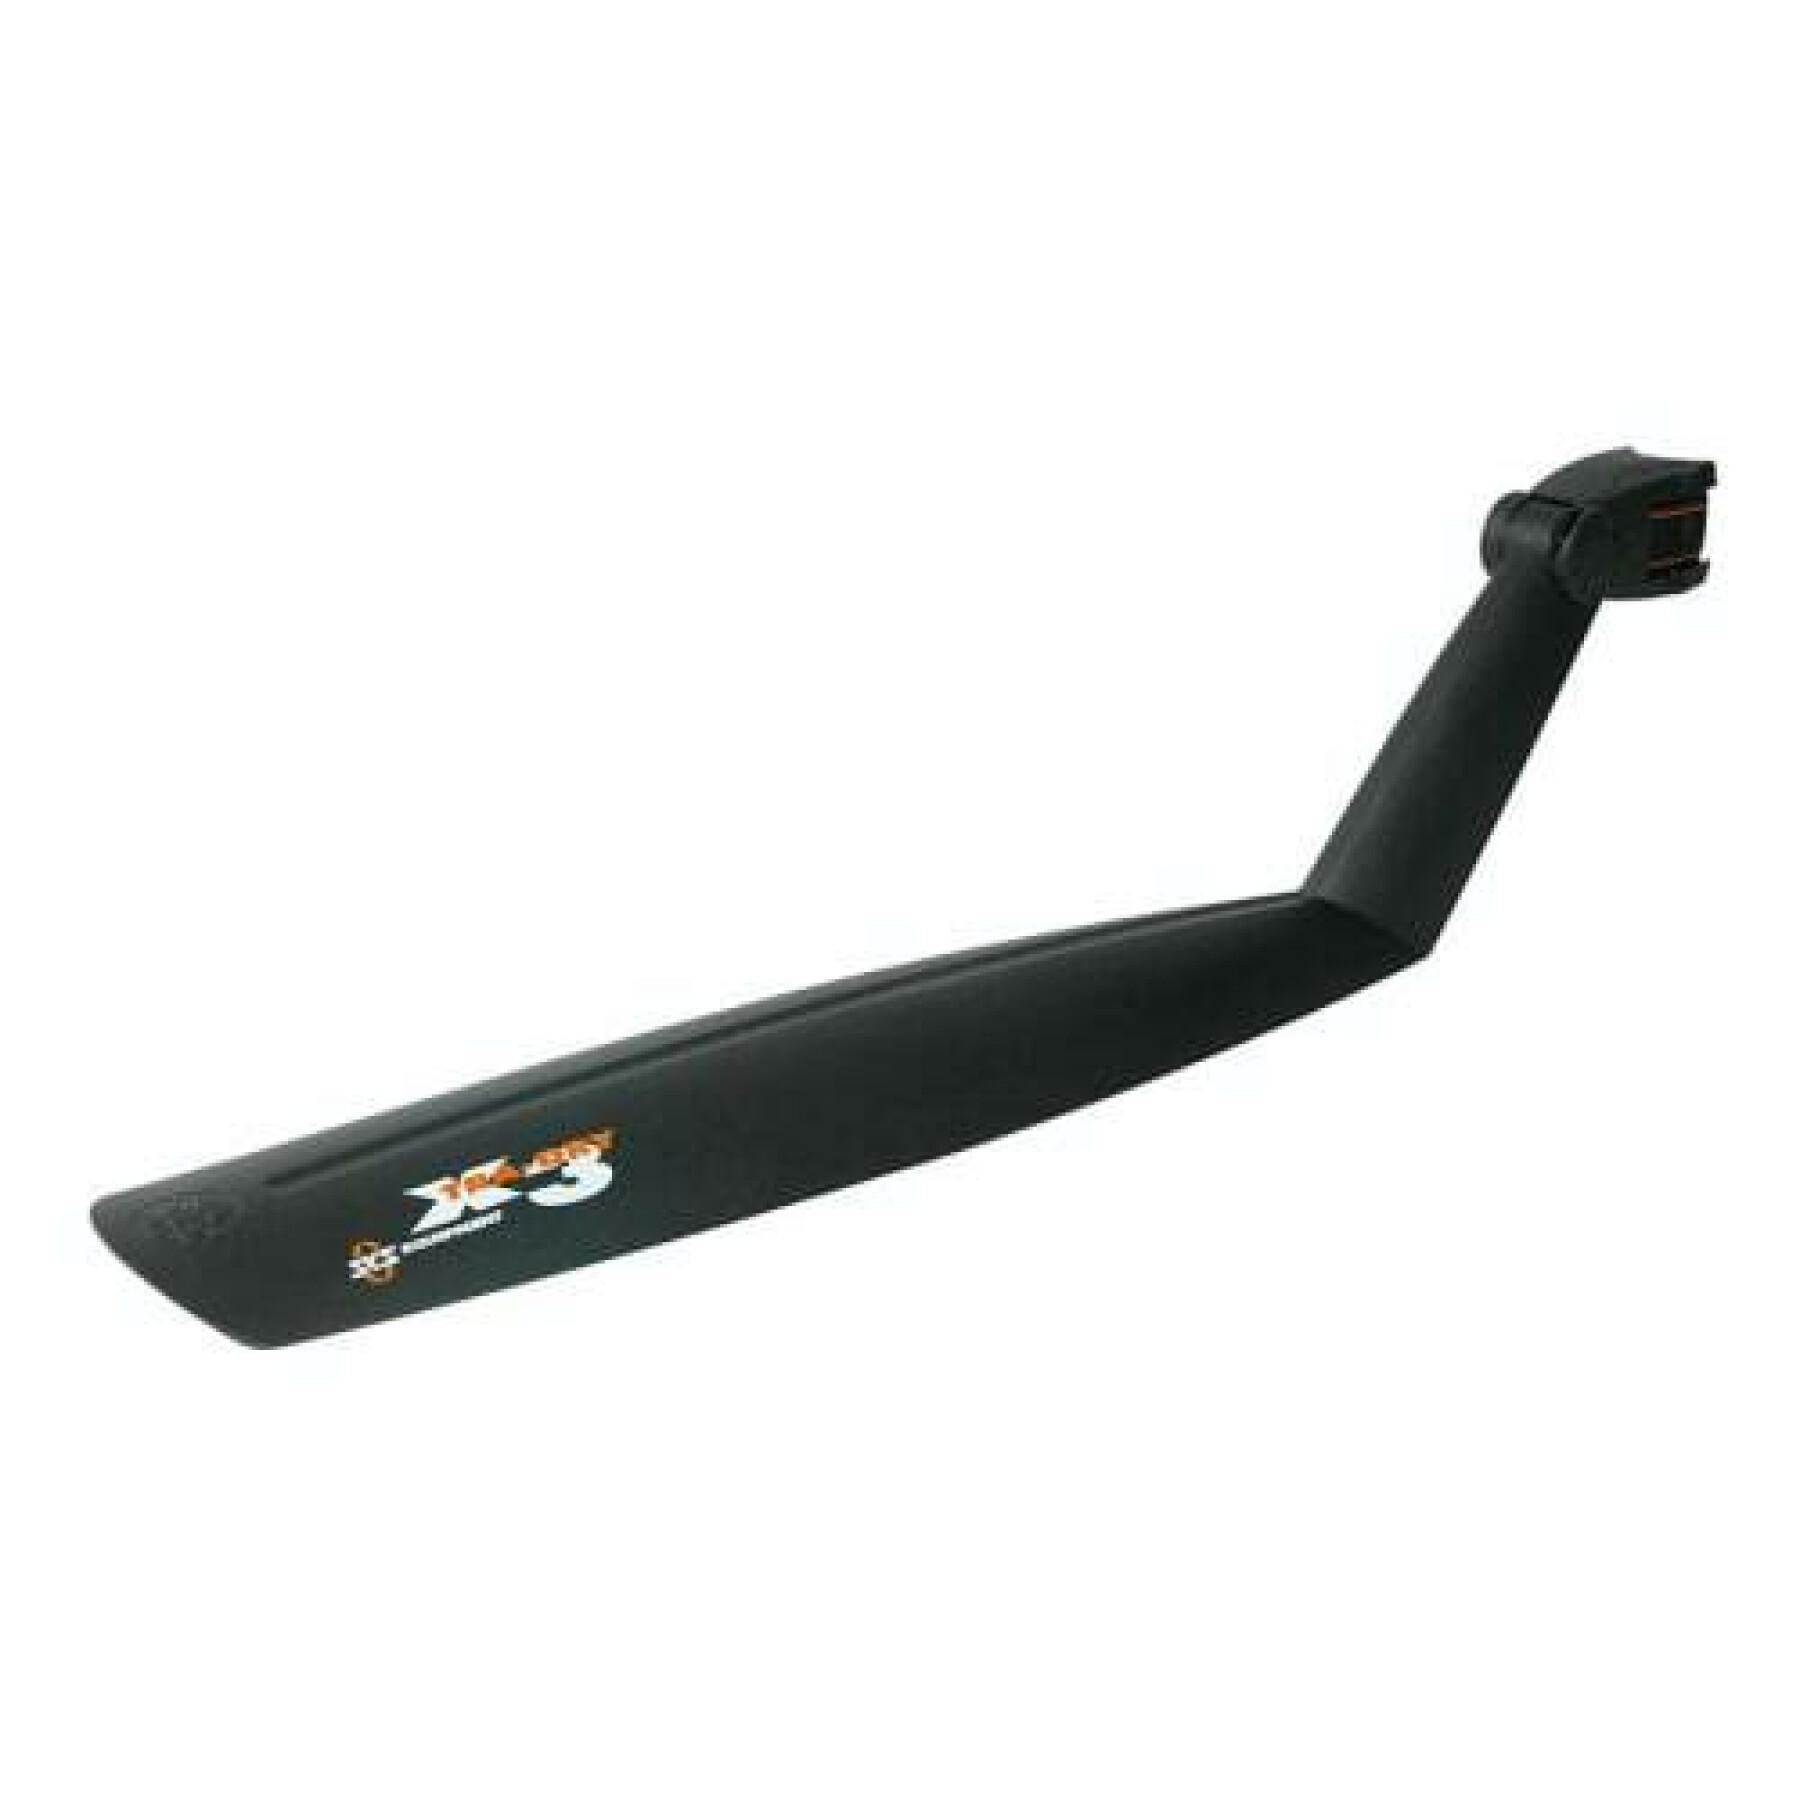 Mudguard at the seatpost SKS x-tra dry 26